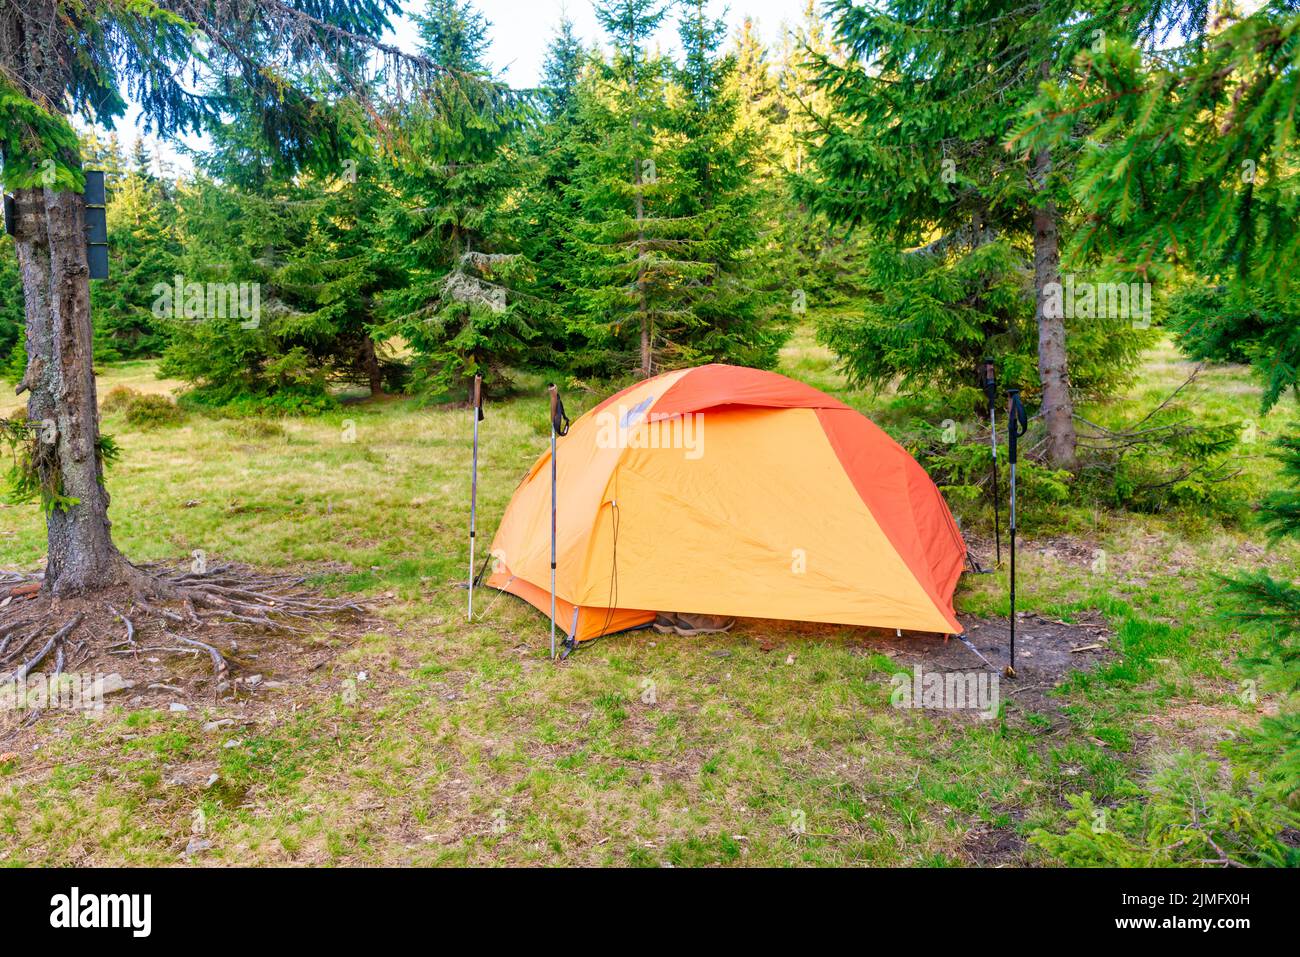 Orange tent camp in green forest Stock Photo